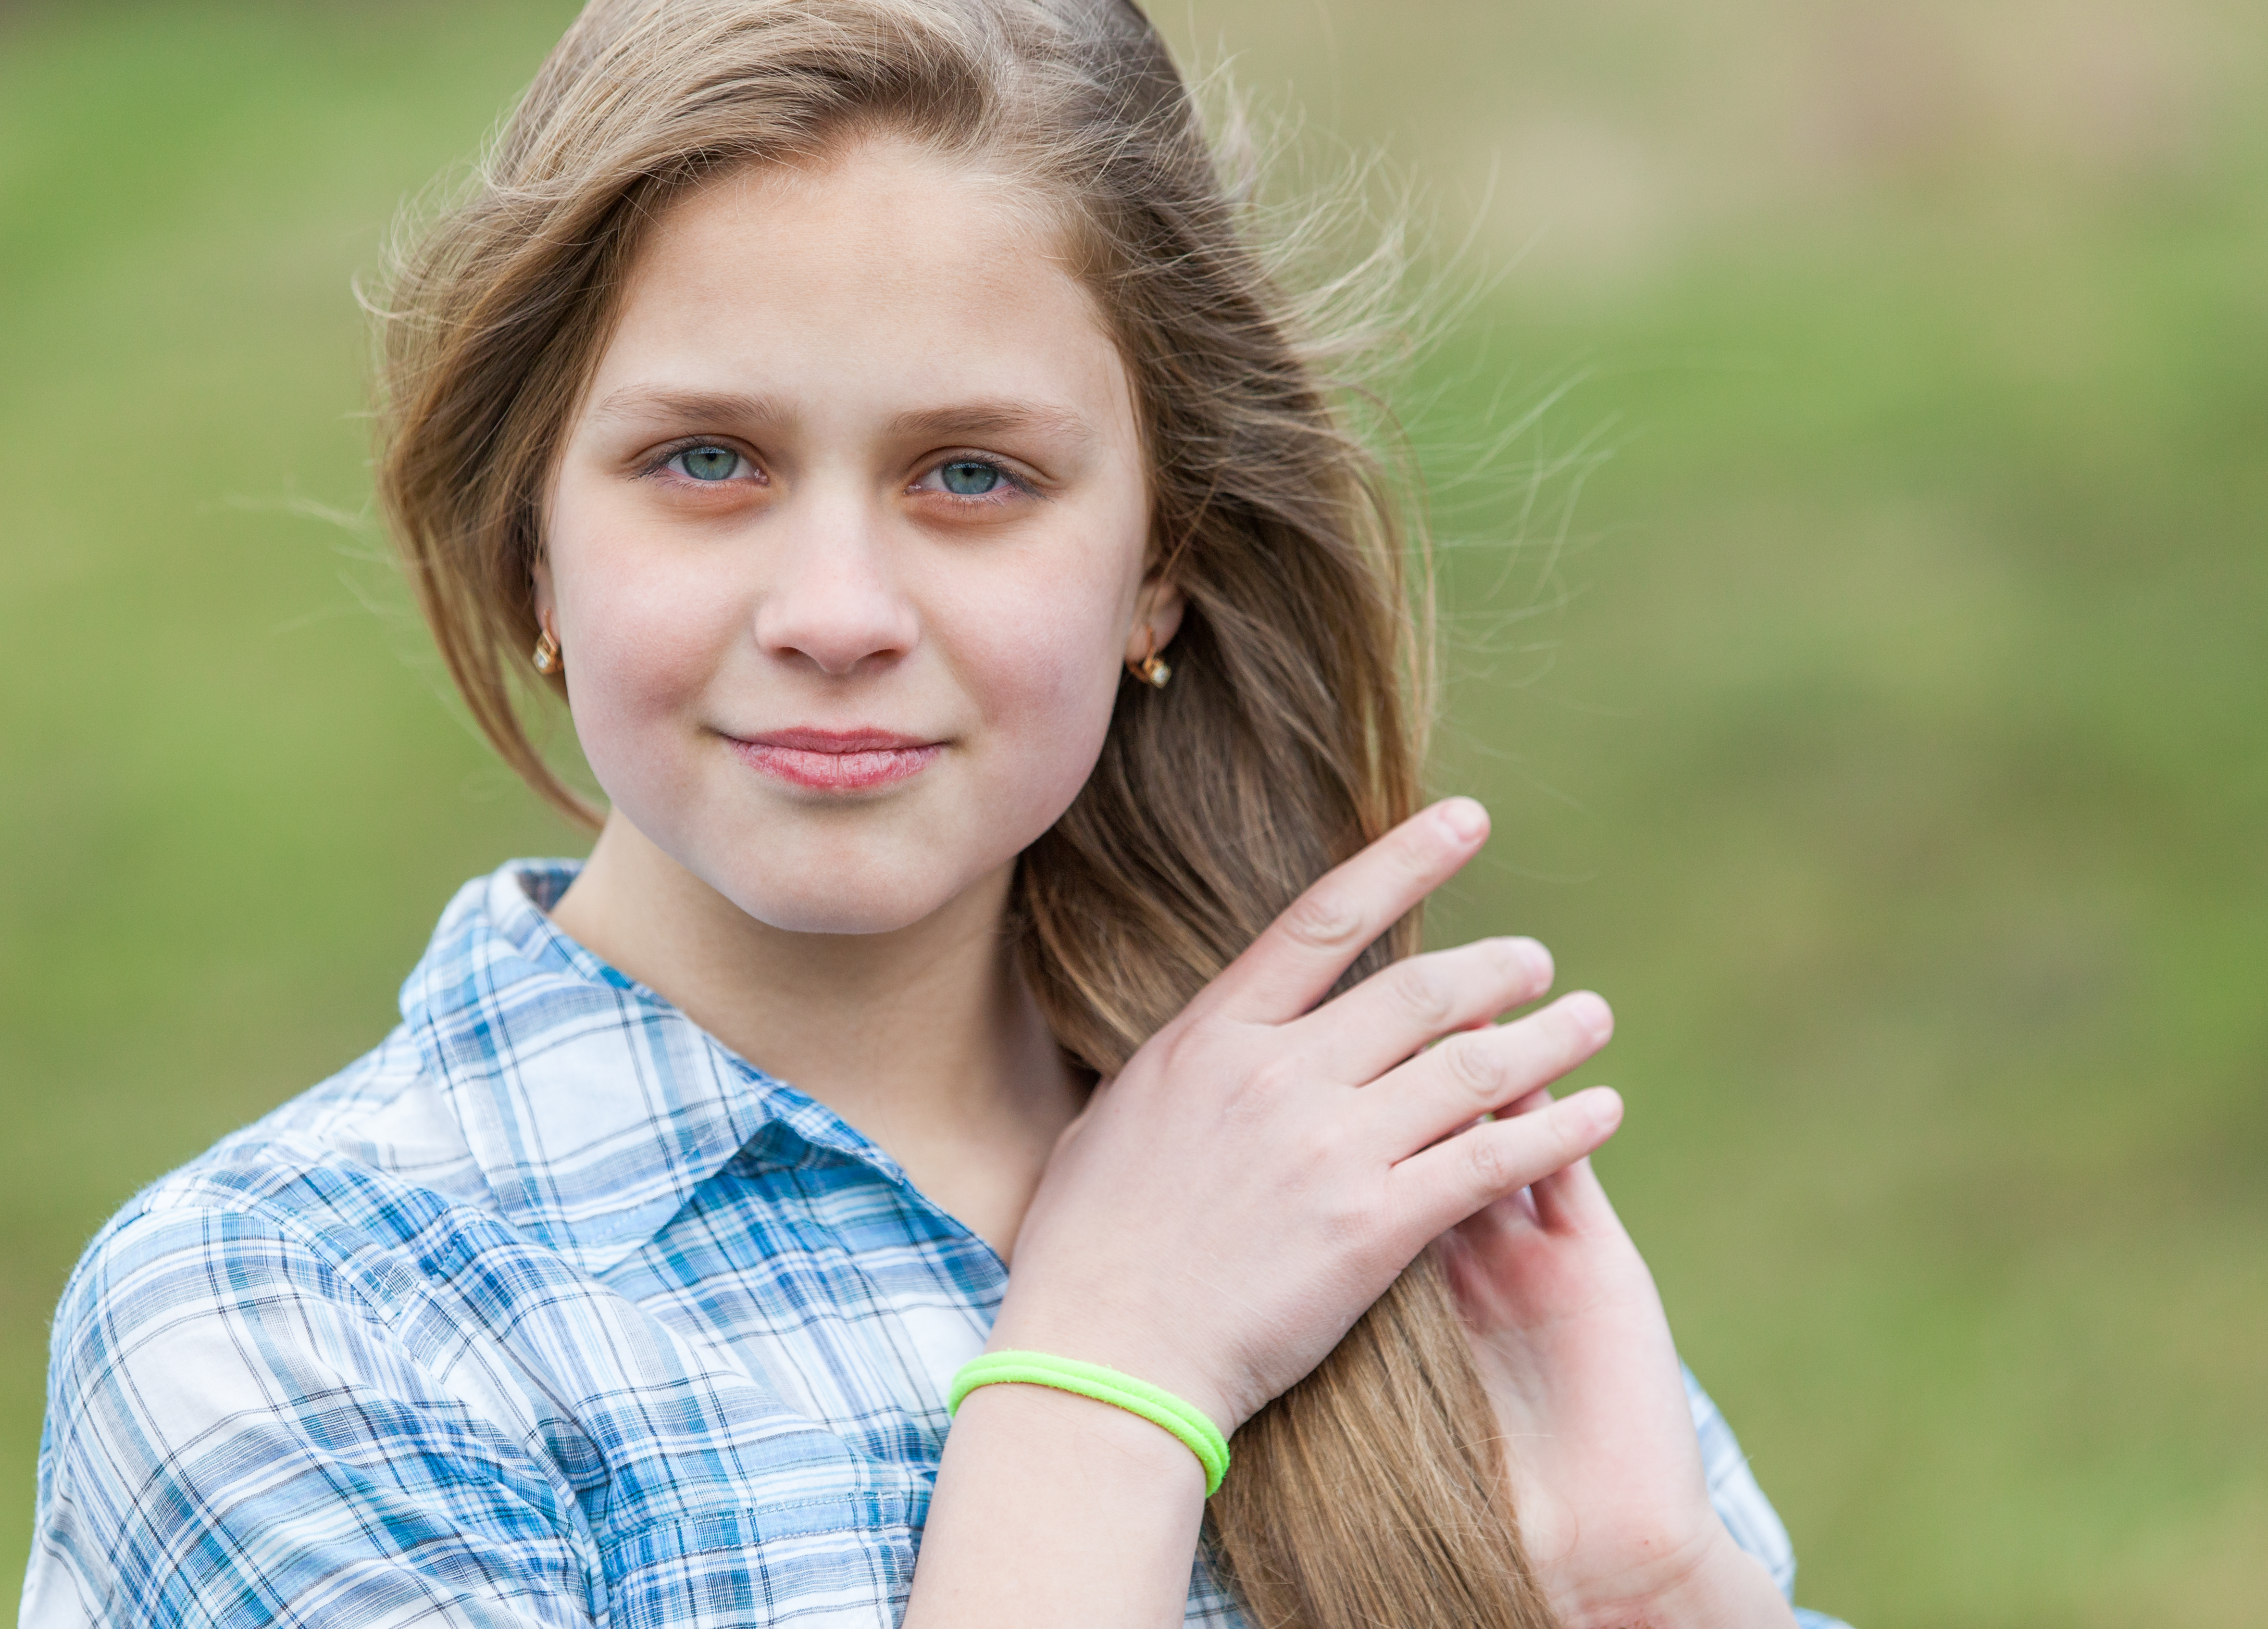 New free photos by RSS. a cute blond 12-year-old girl photographed in April...